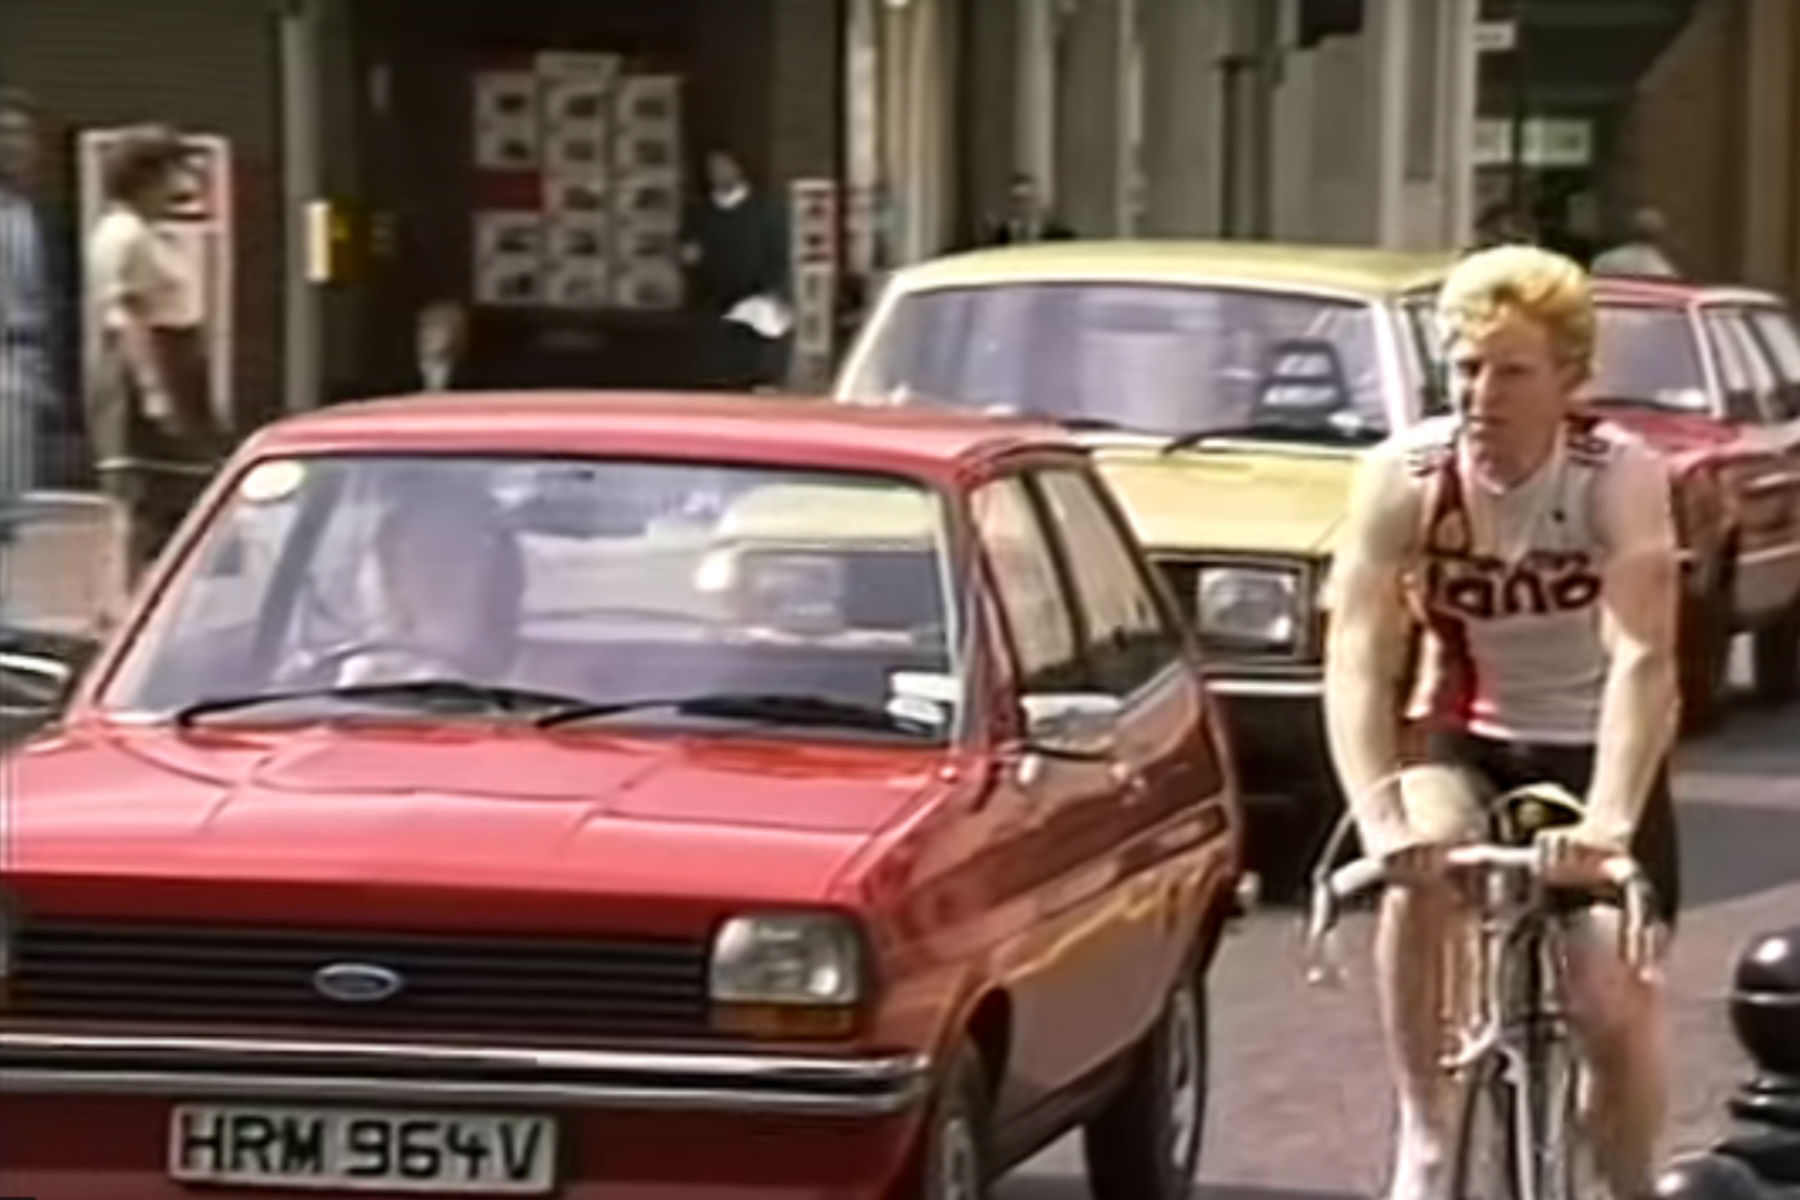 Acceptable in the 80s: 10 old videos to take you back in time